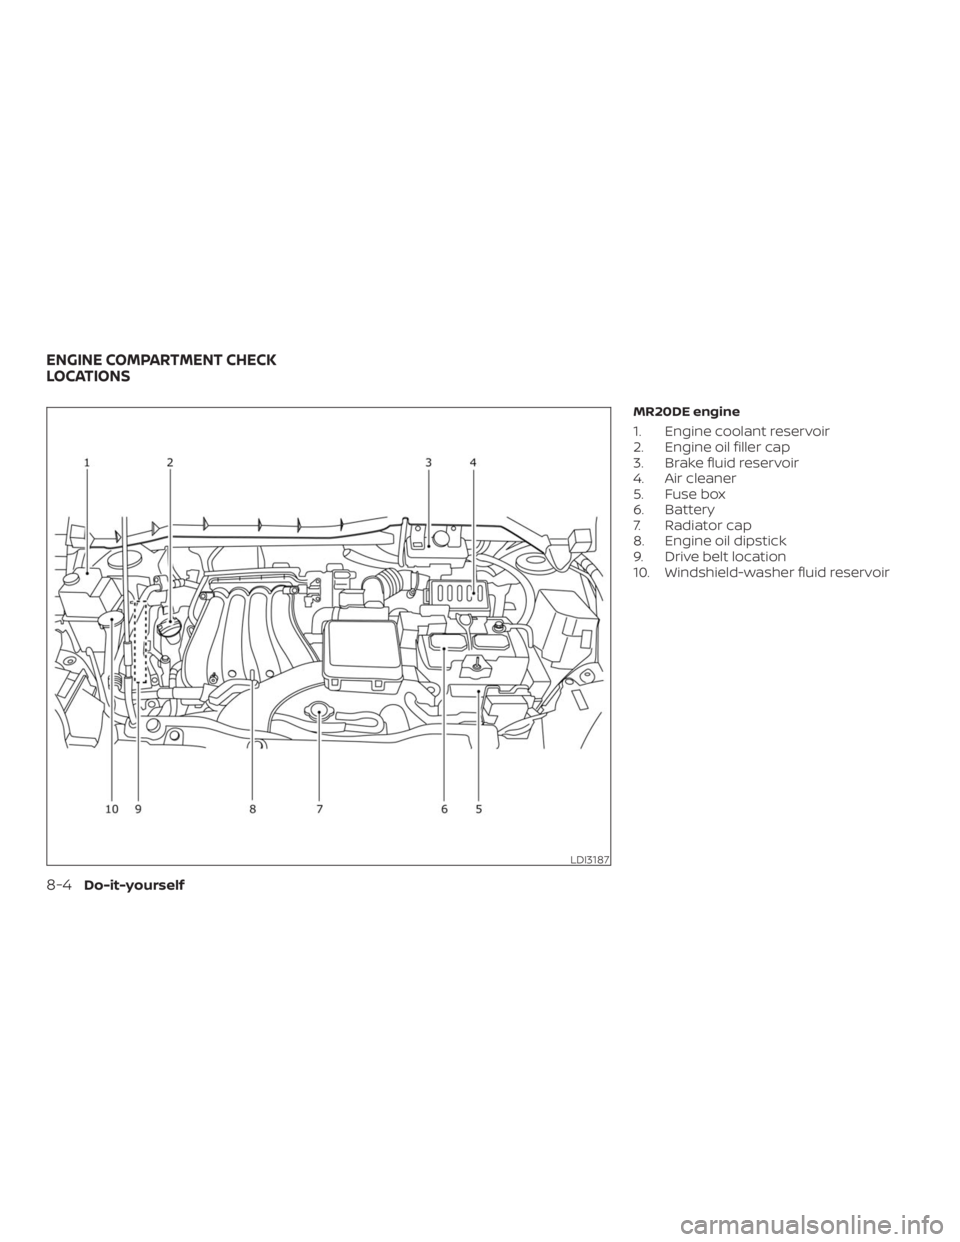 NISSAN NV200 2019  Owners Manual LDI3187
ENGINE COMPARTMENT CHECK
LOCATIONS 